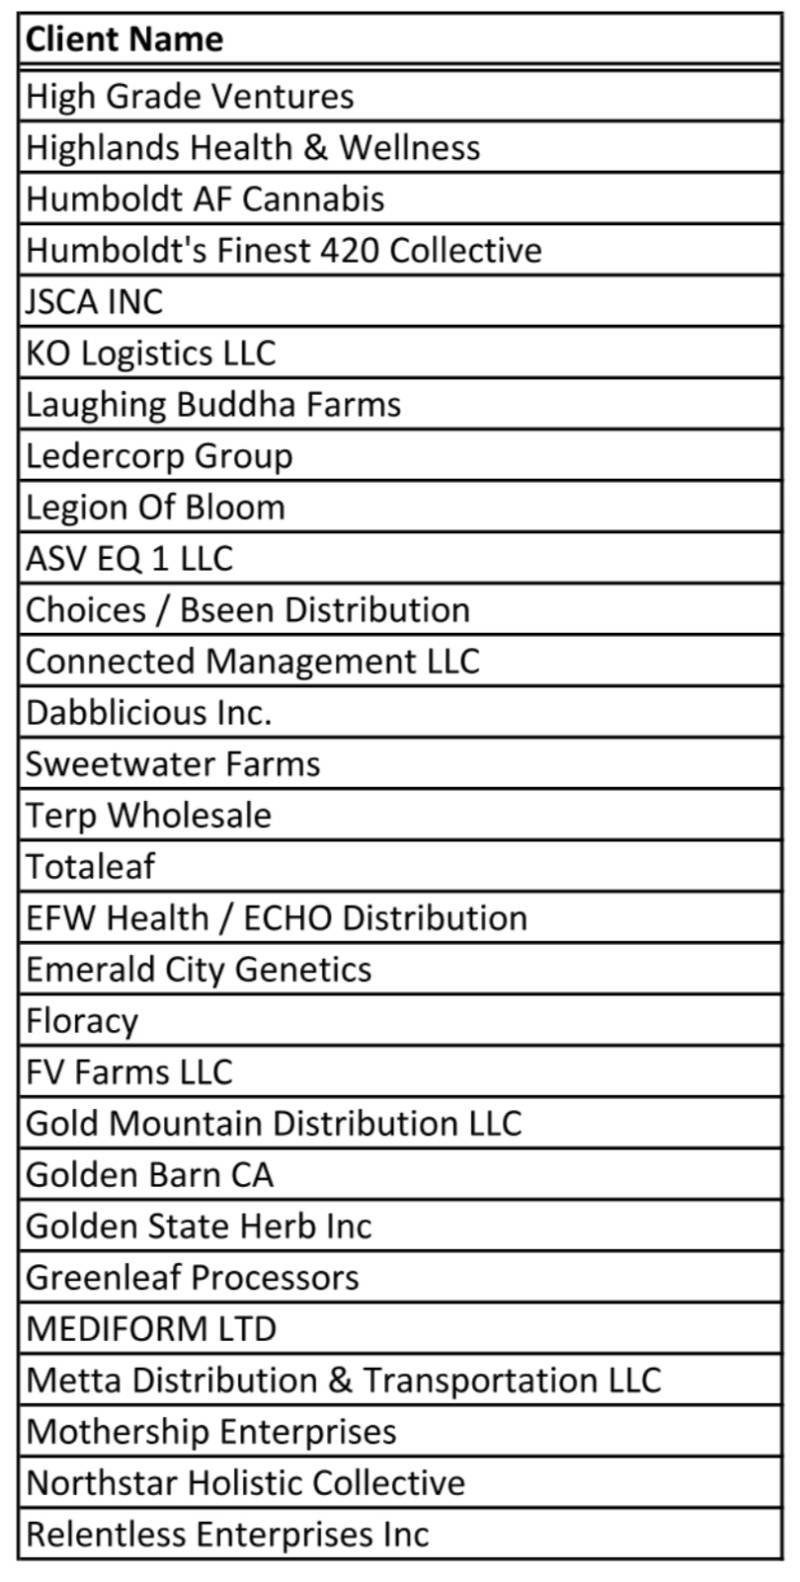 29 companies have been named in the recall.